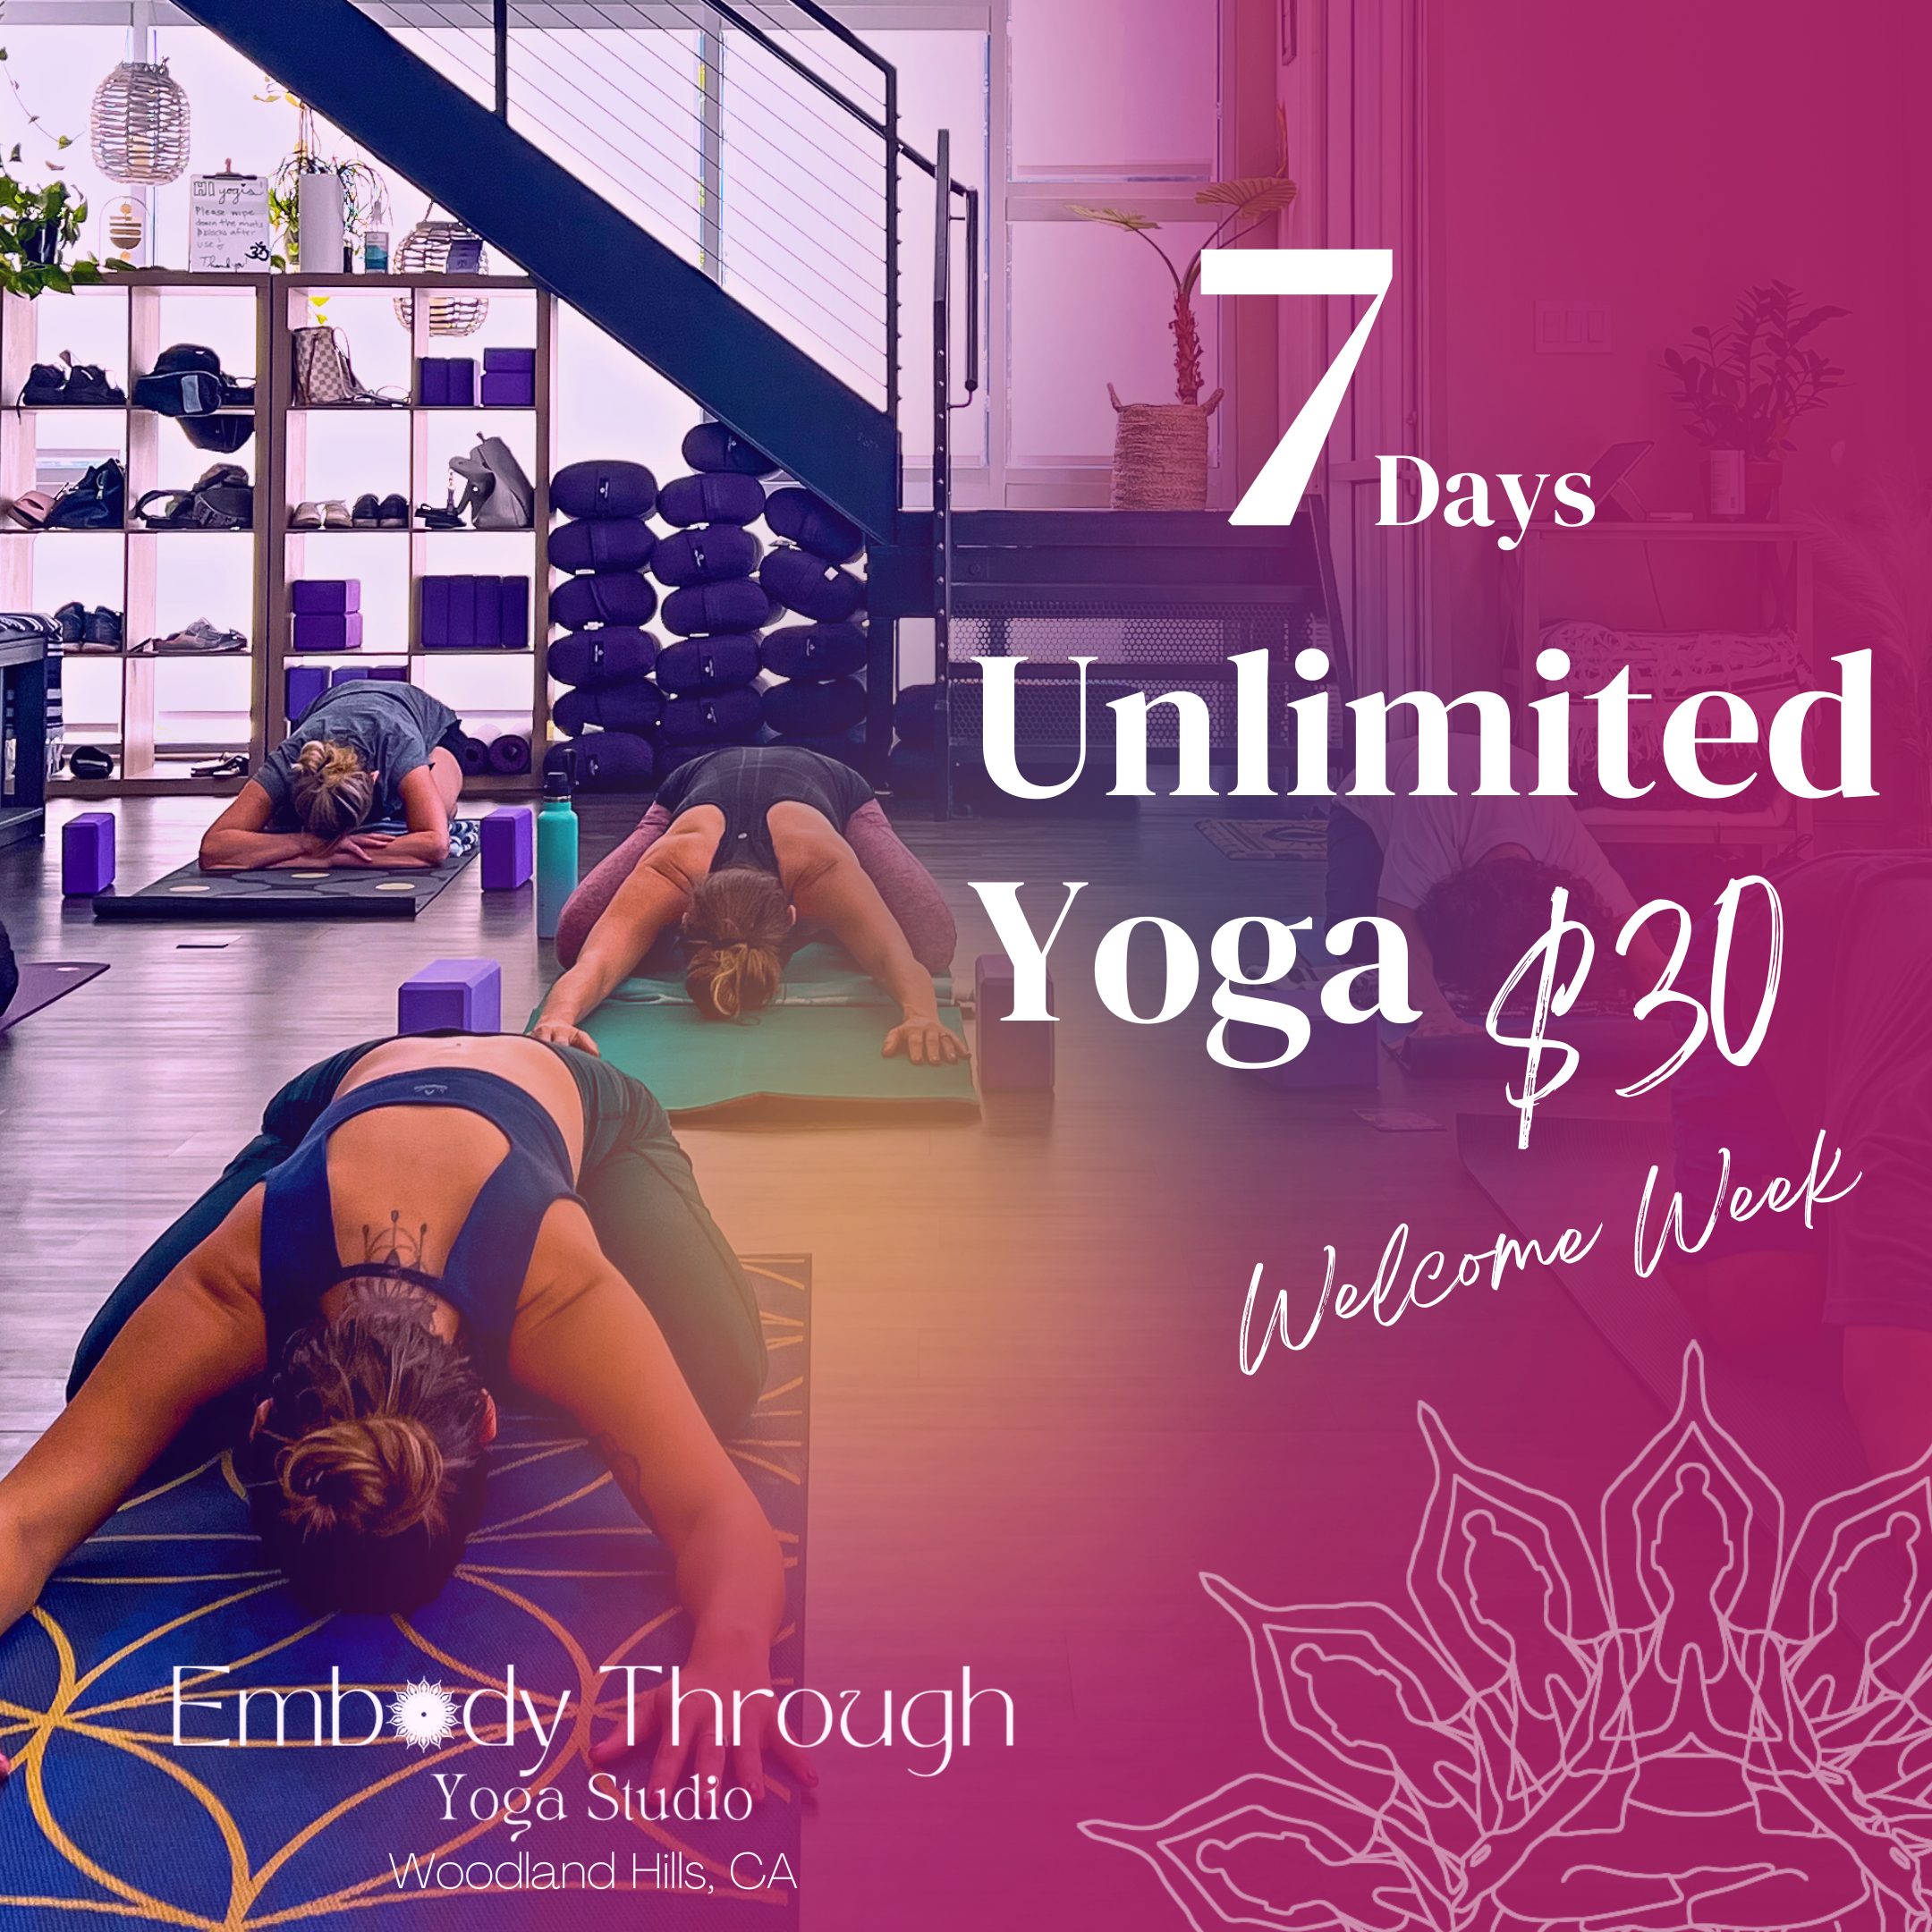 Welcome Week - 7 Days of Unlimited Yoga — Embody Through Yoga